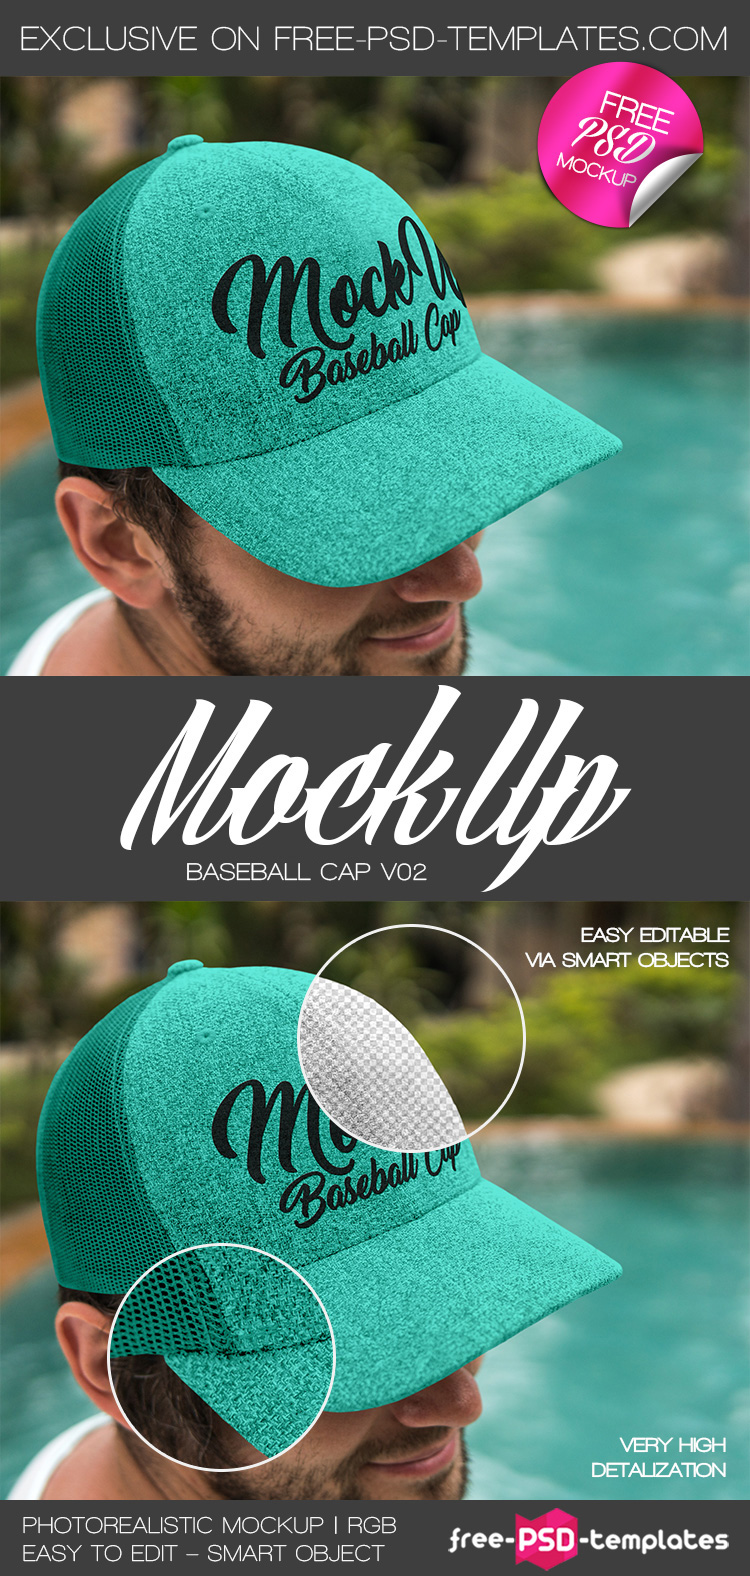 Download Free Baseball Cap V02 Mock-up in PSD | Free PSD Templates